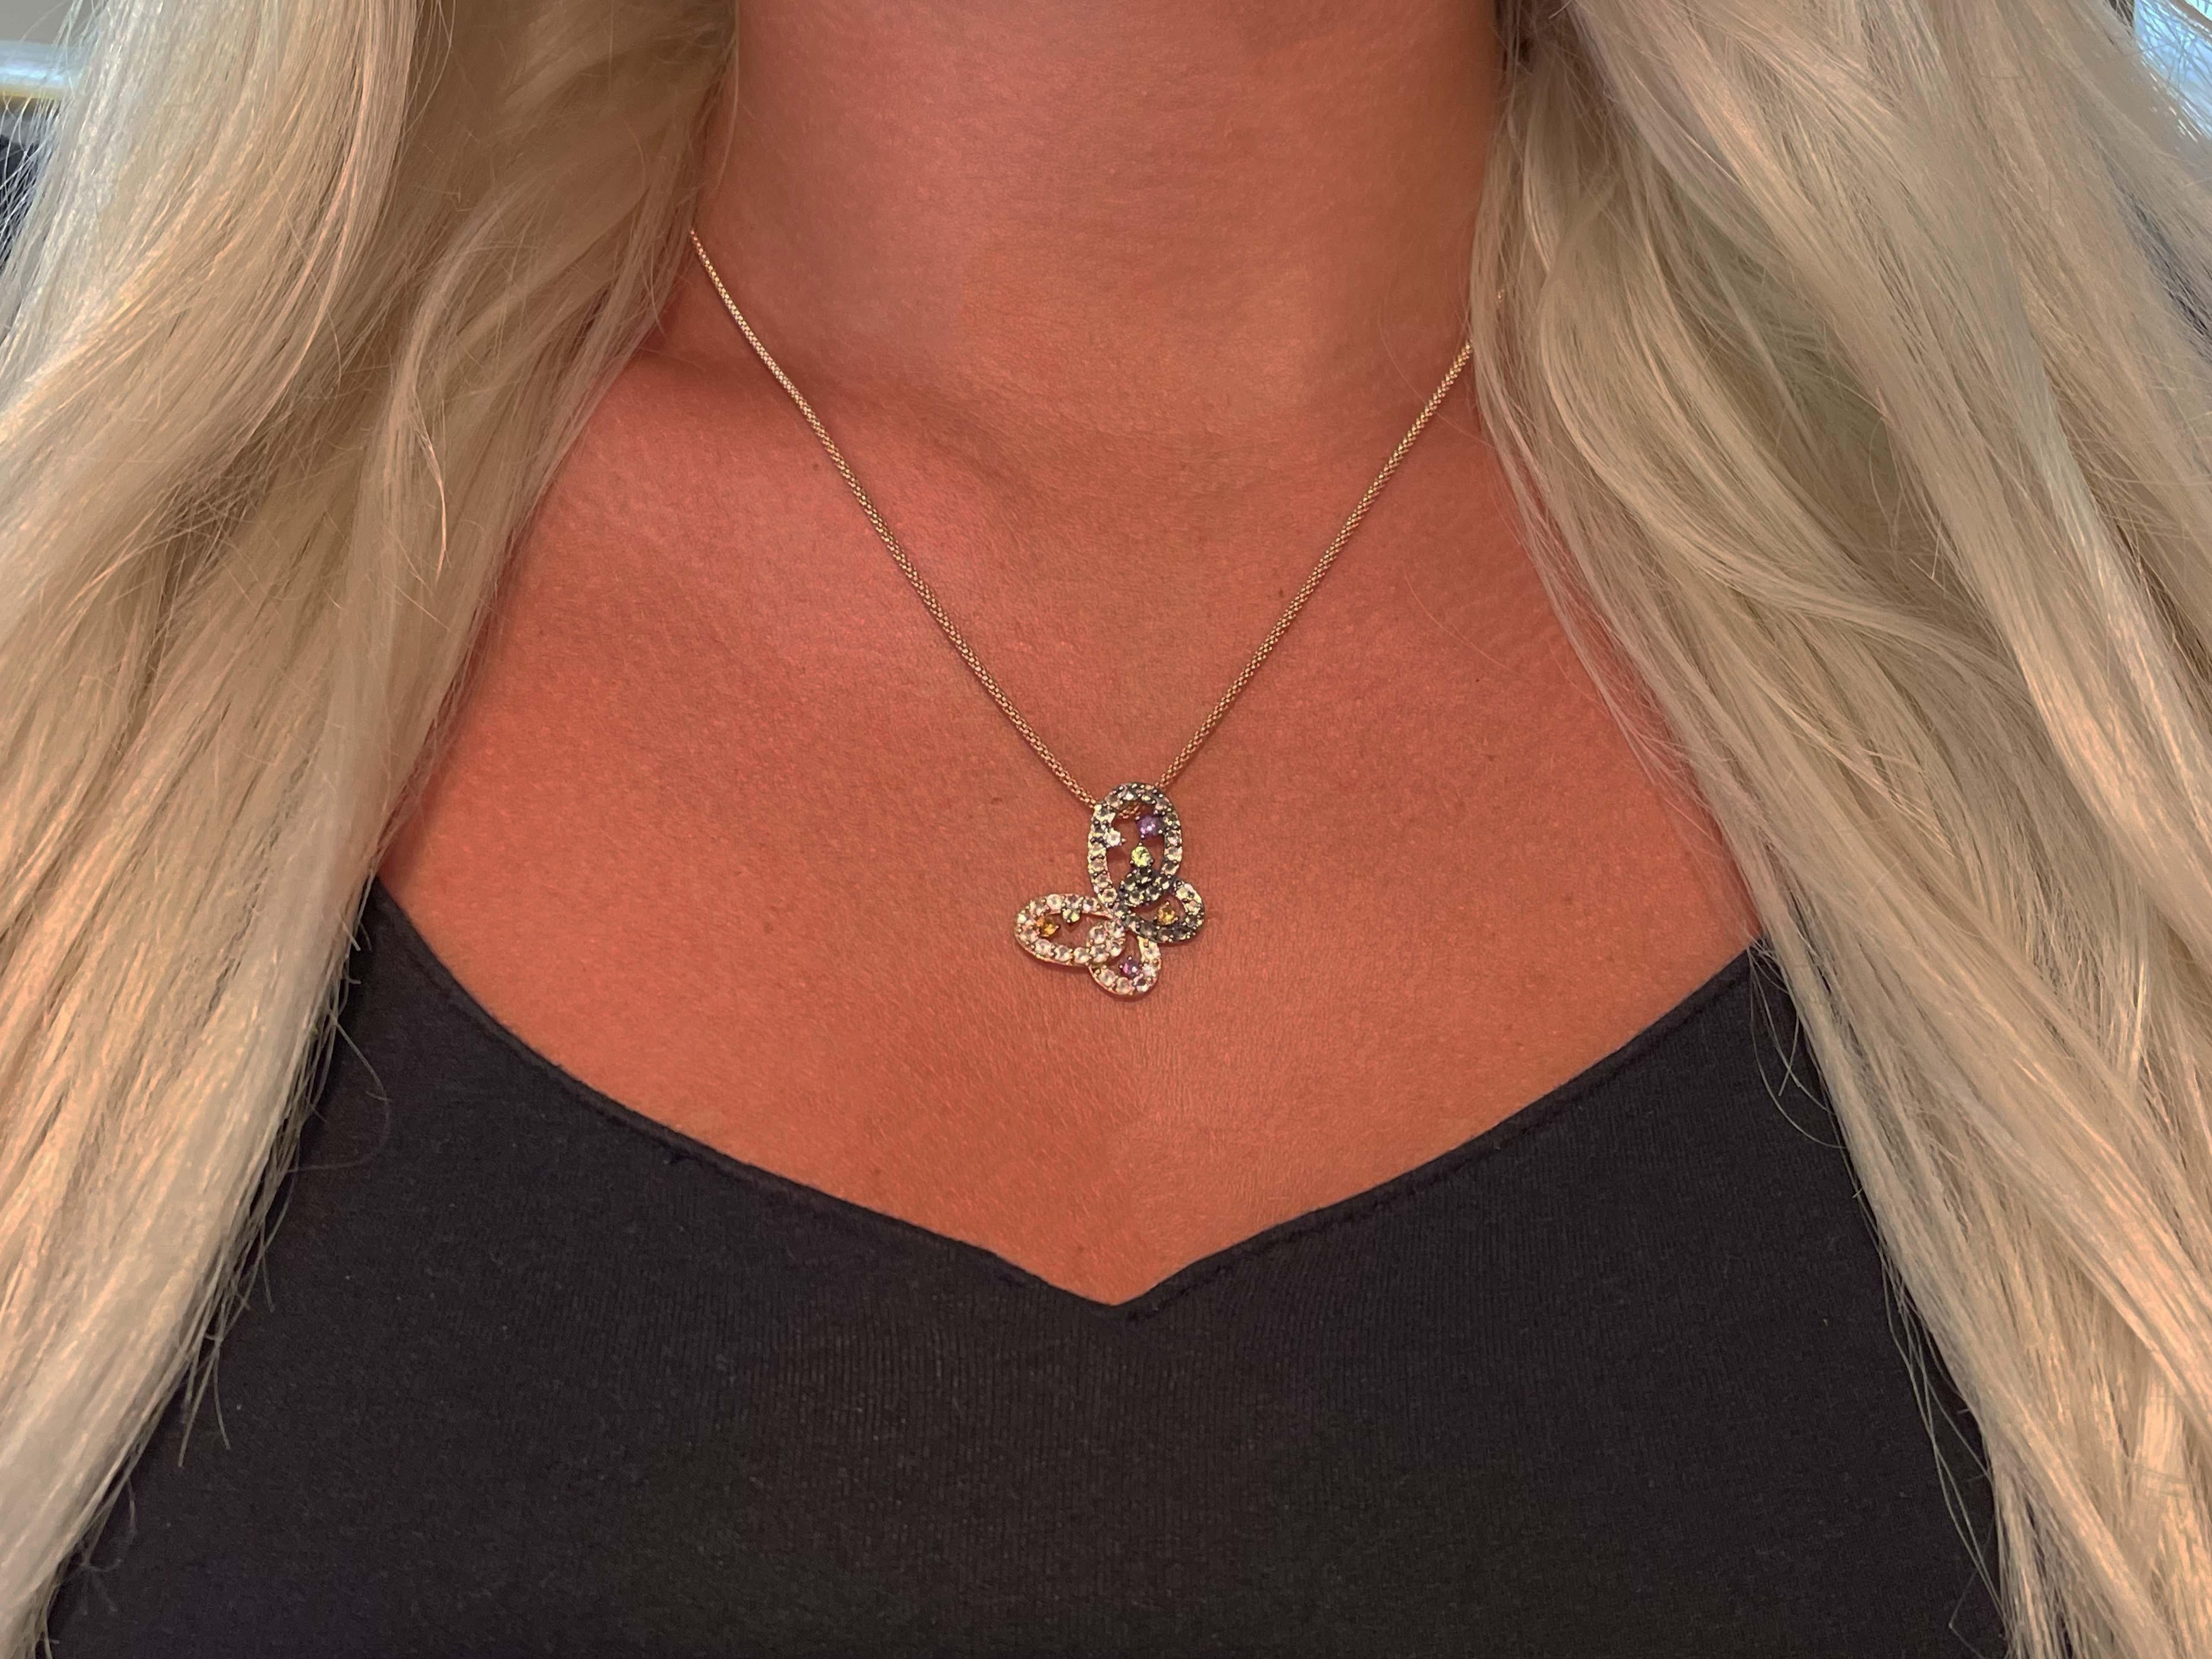 LeVian Multi Gemstone Butterfly Necklace in14K Rose Gold. This beautiful butterfly pendant is  set with 52 multi color gemstones including chocolate quartz vanilla sapphires, cotton candy and grape amethyst, cinnamon citrine and green apple peridot.